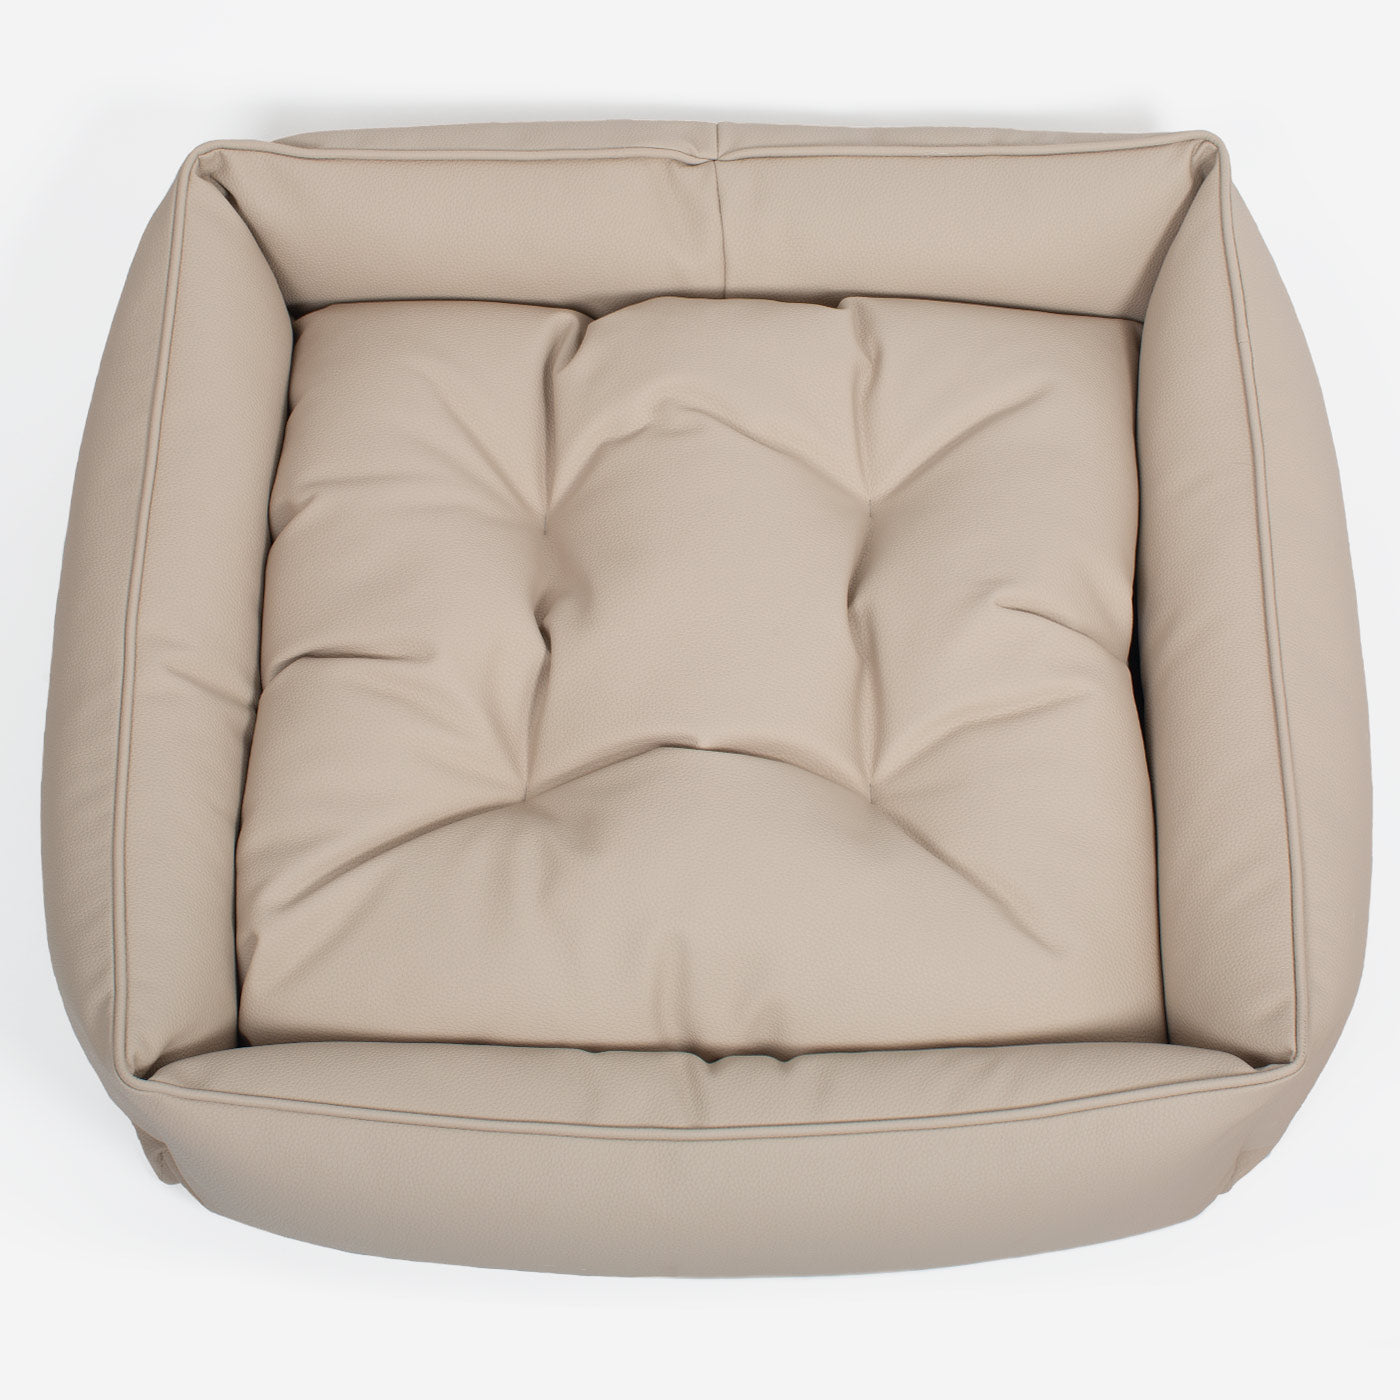 [color:sand] Luxury Handmade Box Bed in Rhino Tough Desert Faux Leather, in Sand, Perfect For Your Pets Nap Time! Available To Personalize at Lords & Labradors US